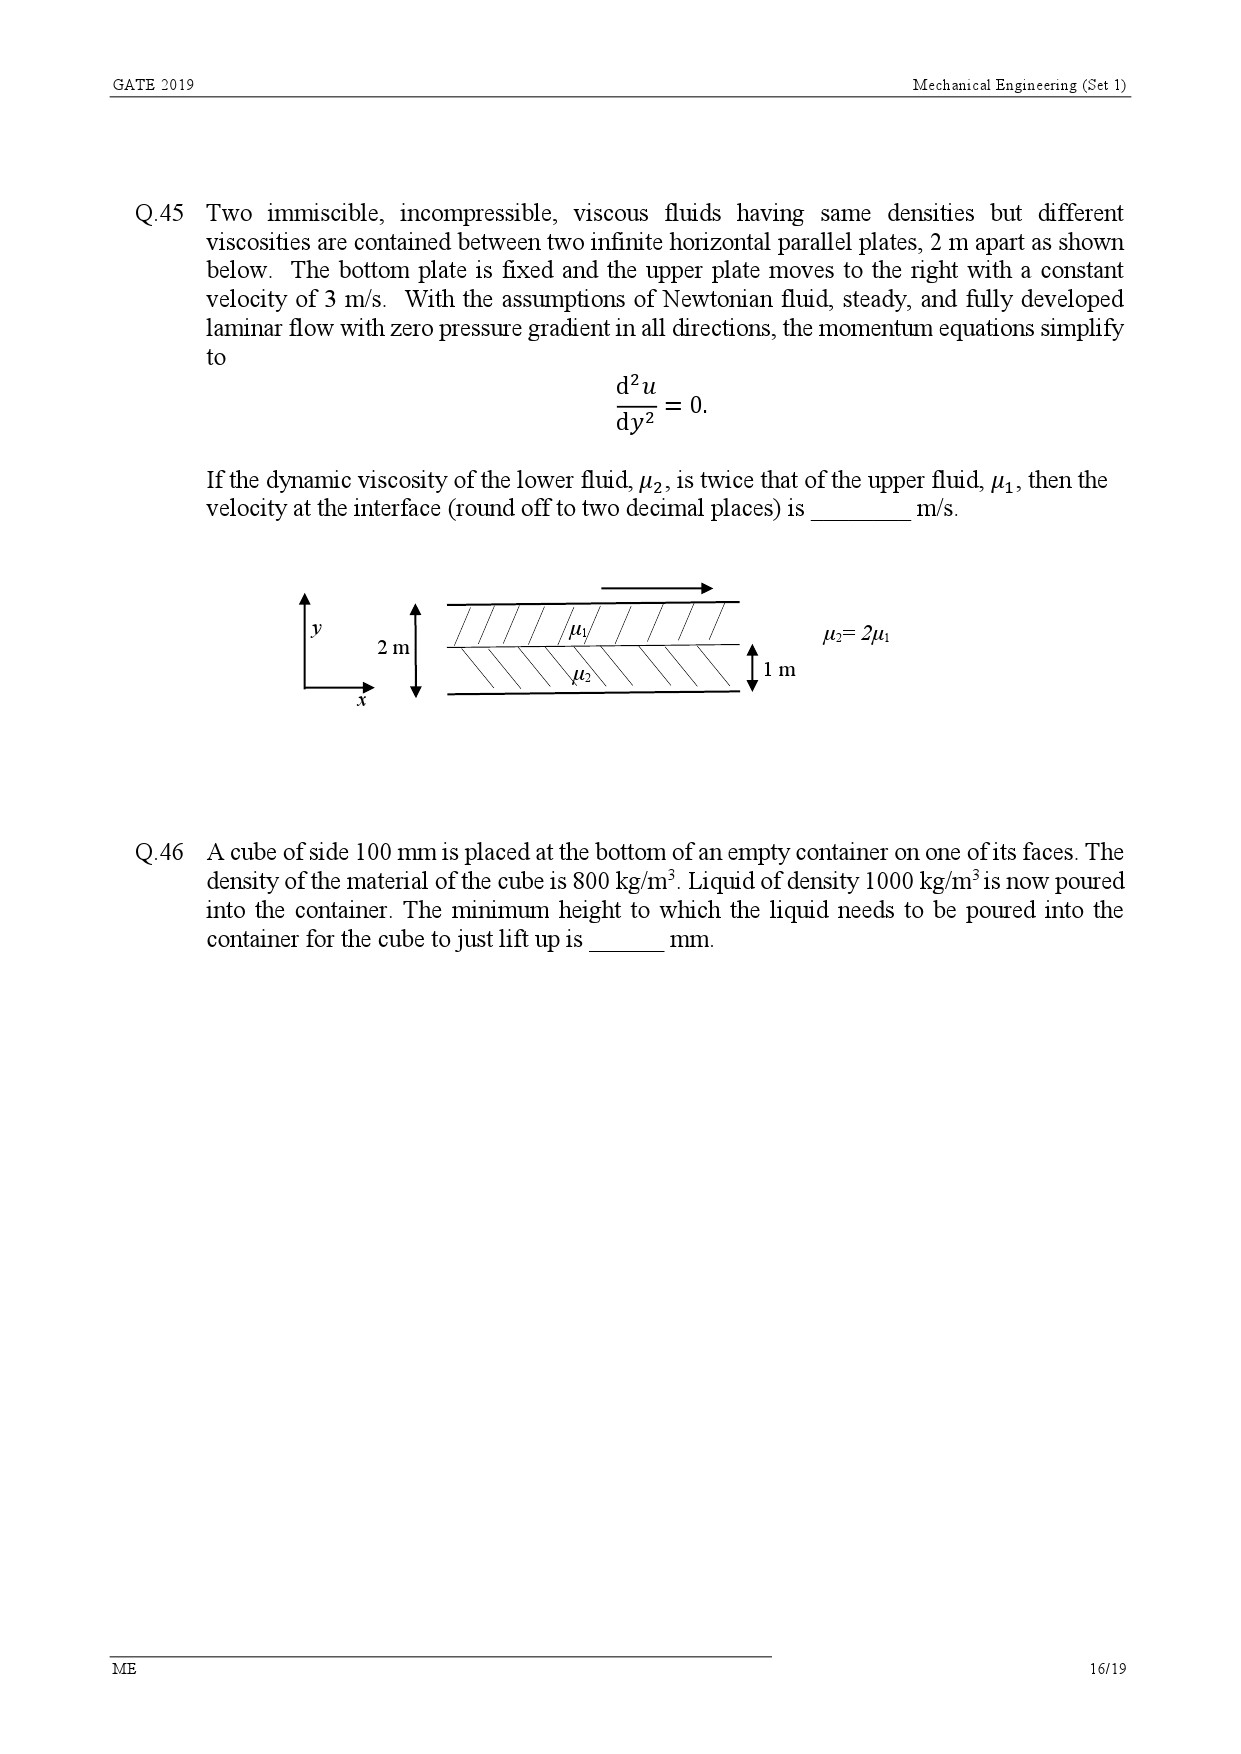 GATE Exam Question Paper 2019 Mechanical Engineering Set 1 19